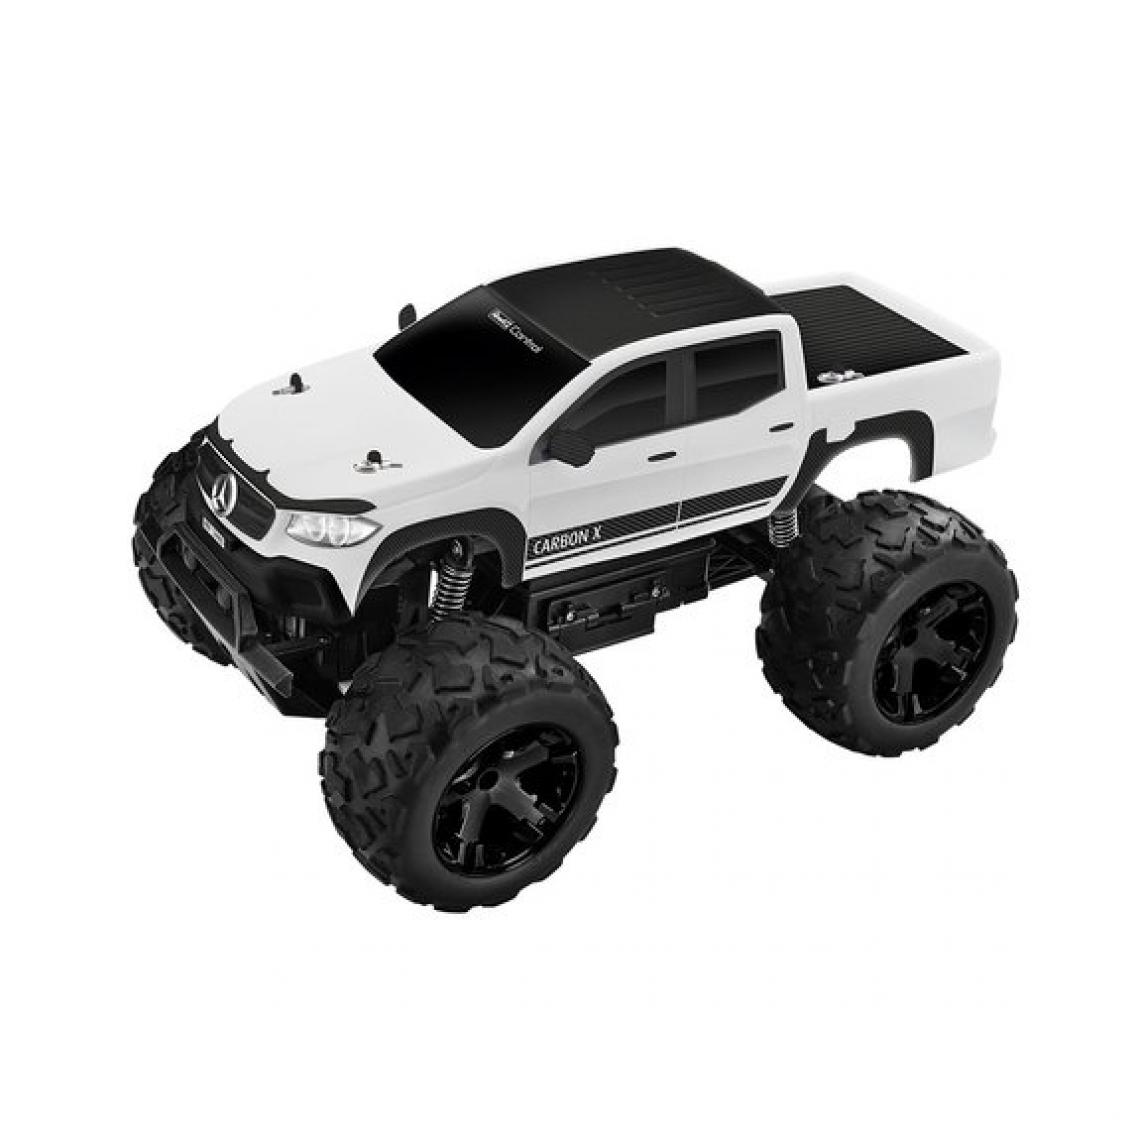 Ludendo - Voiture radiocommandée Revell Control - Pick Up Mercedes Class X 2,4 GHz - Voitures RC